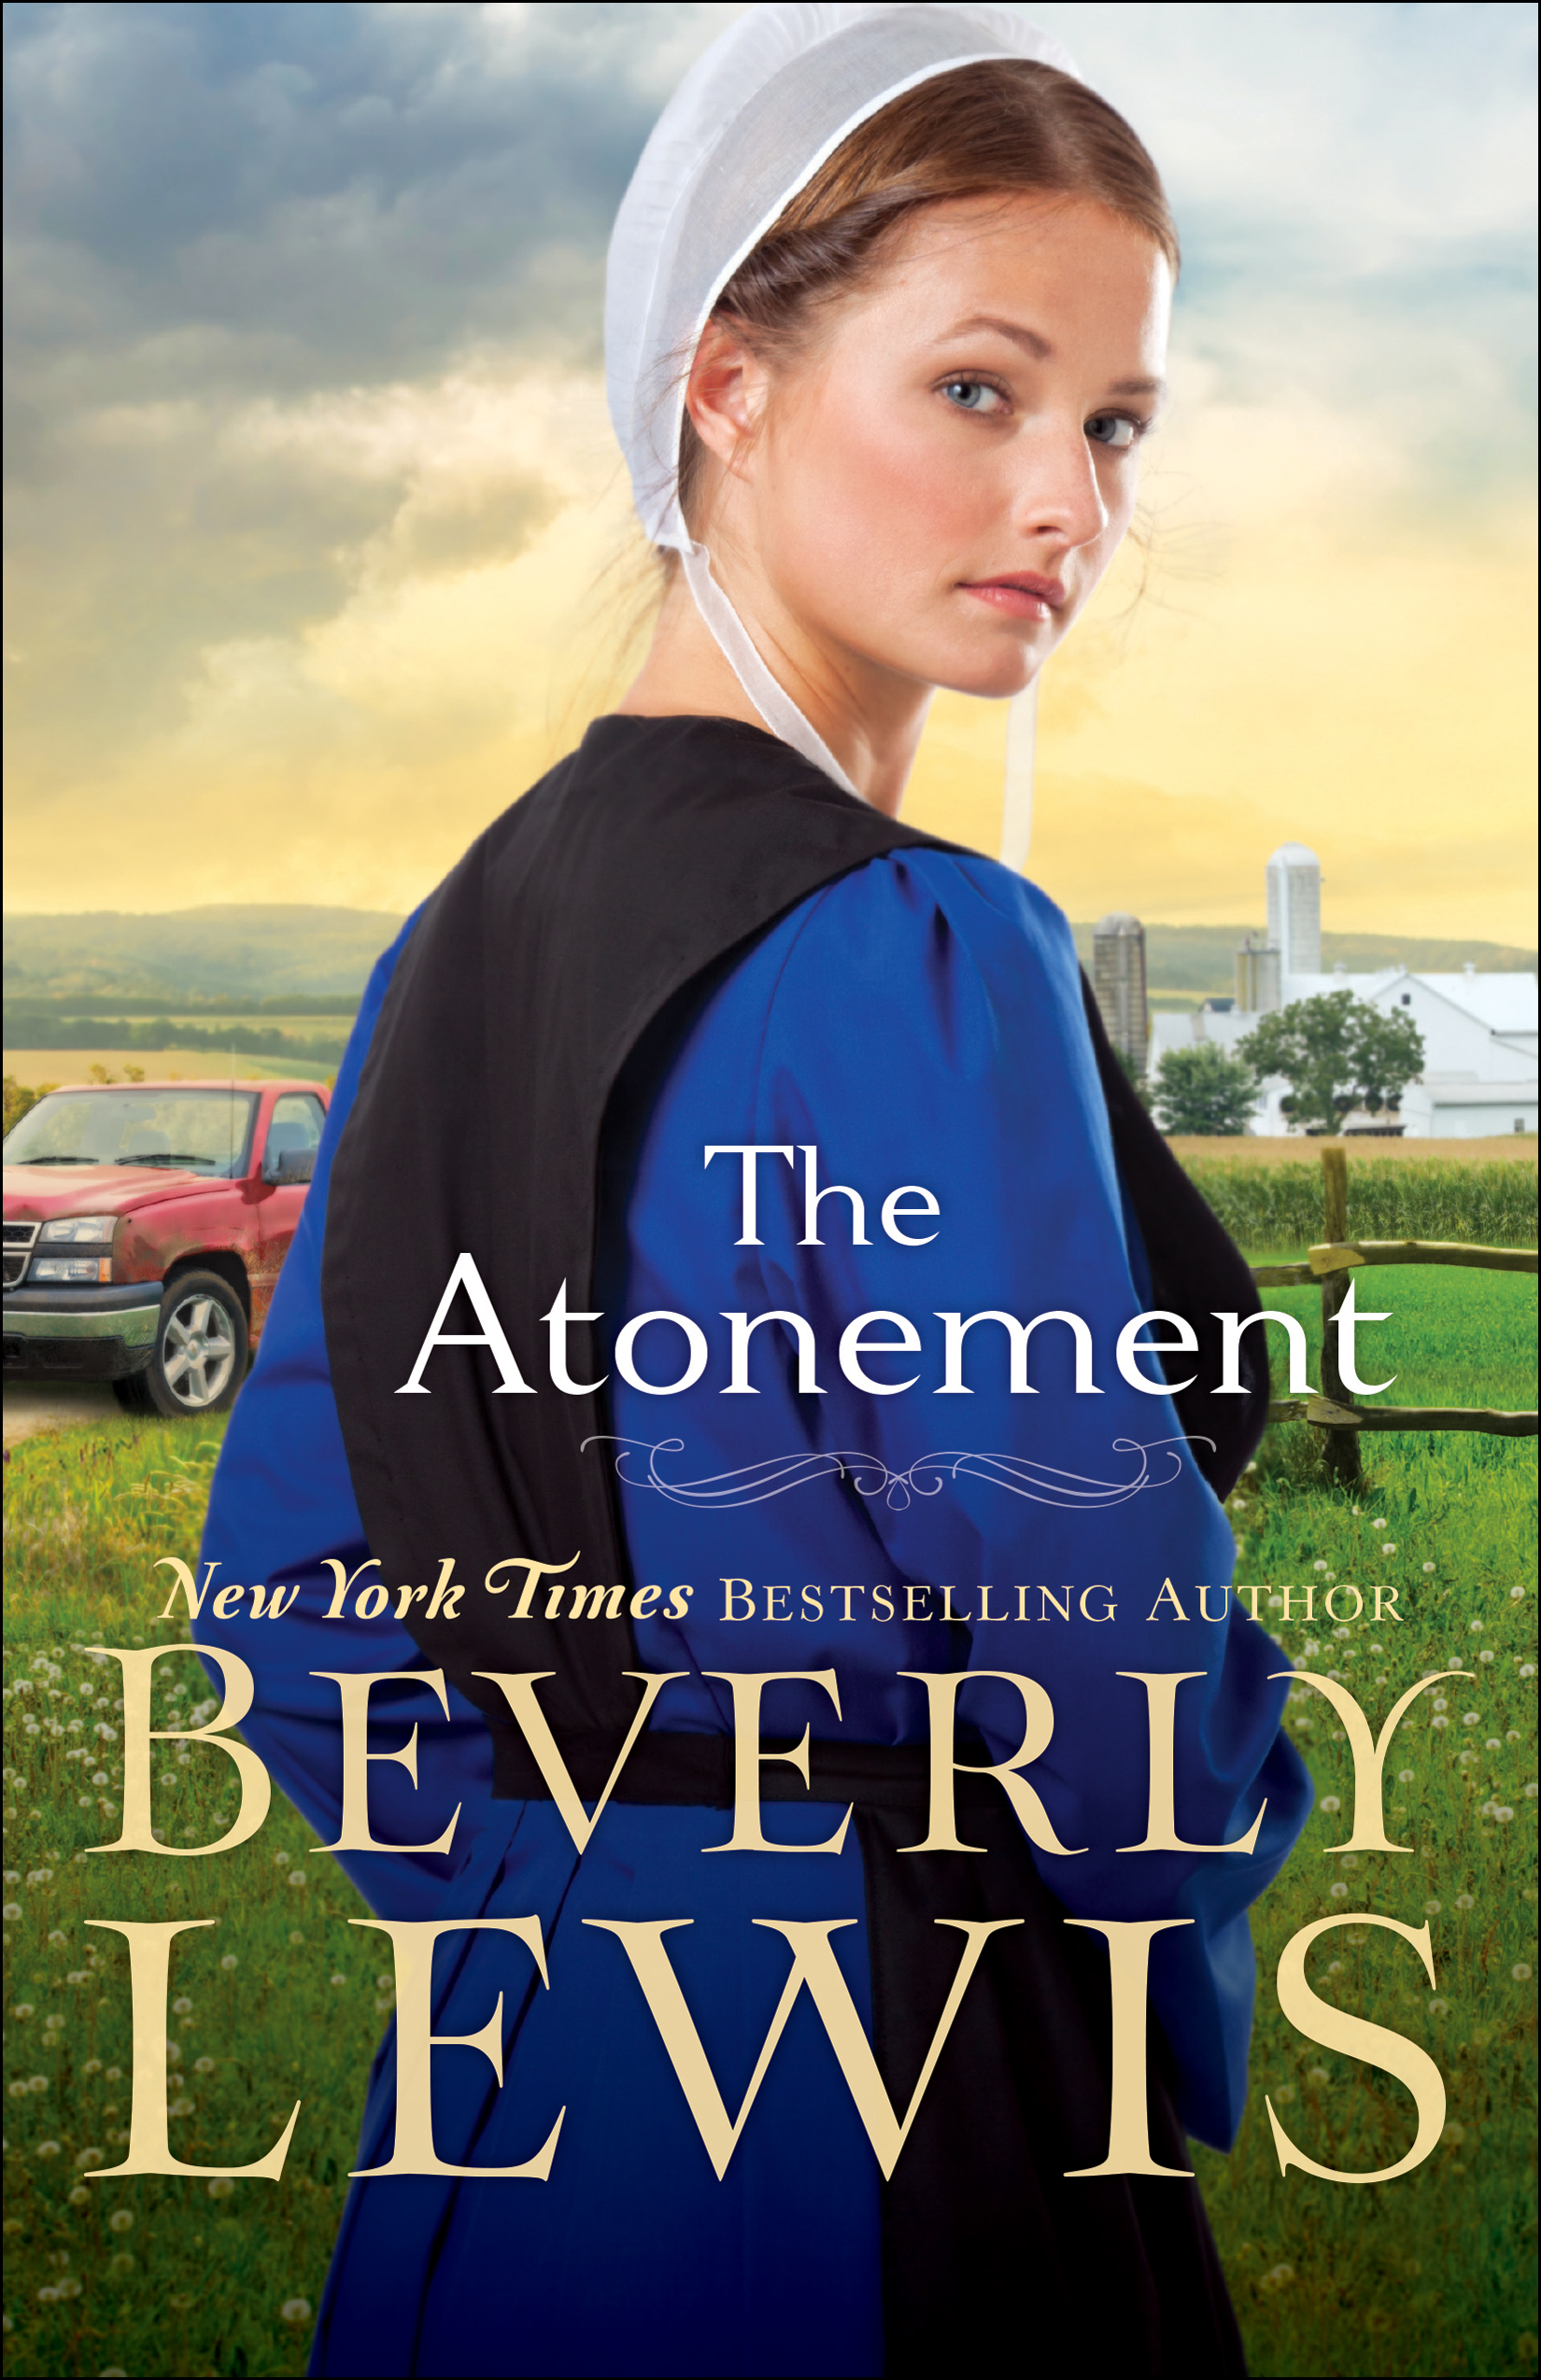 The Atonement by Beverly Lewis